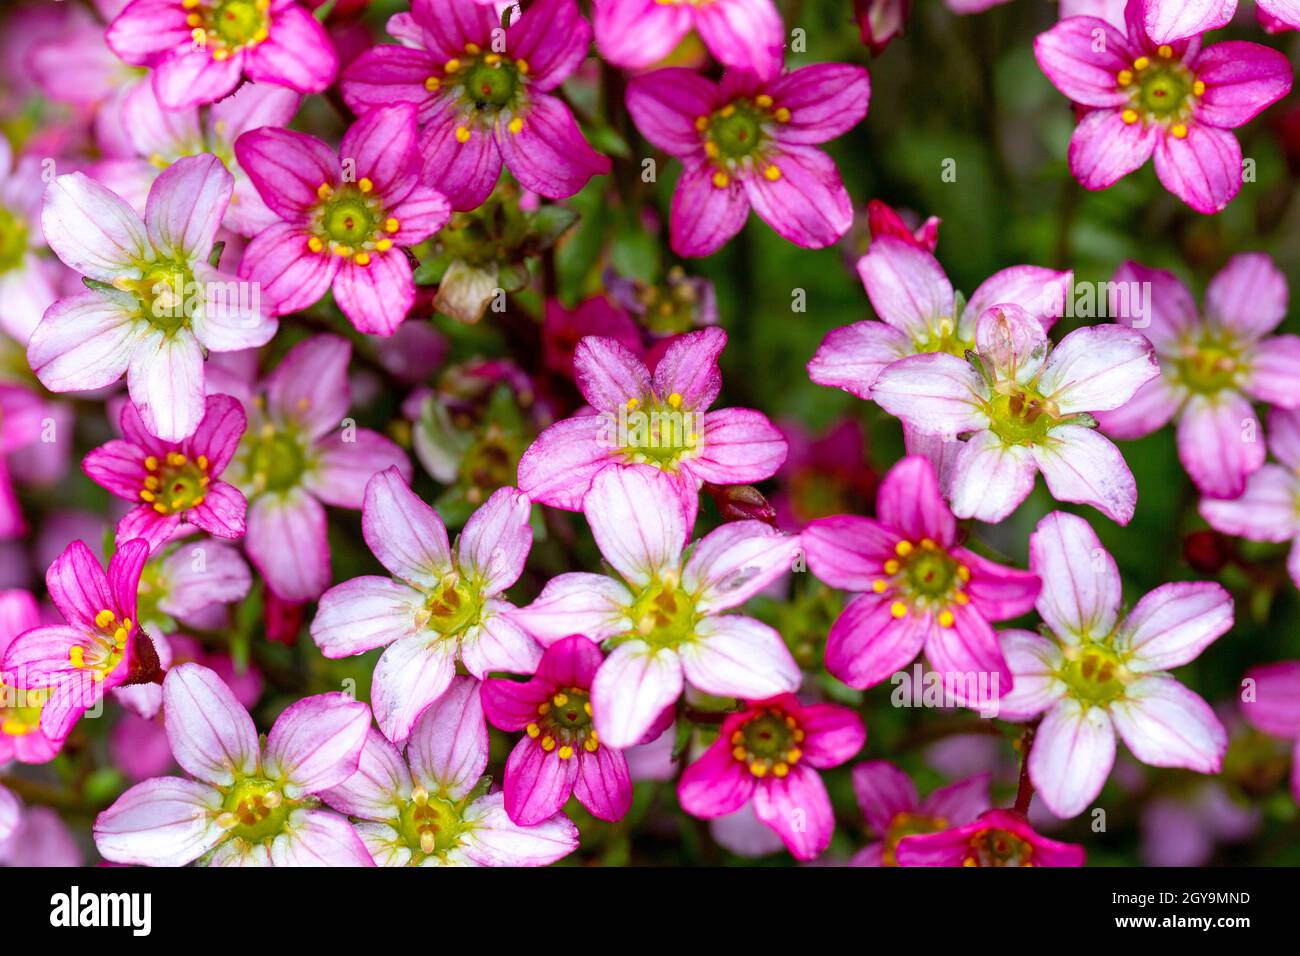 Beautiful spring flowers of Saxifraga × arendsii blooming in the garden, close up Stock Photo